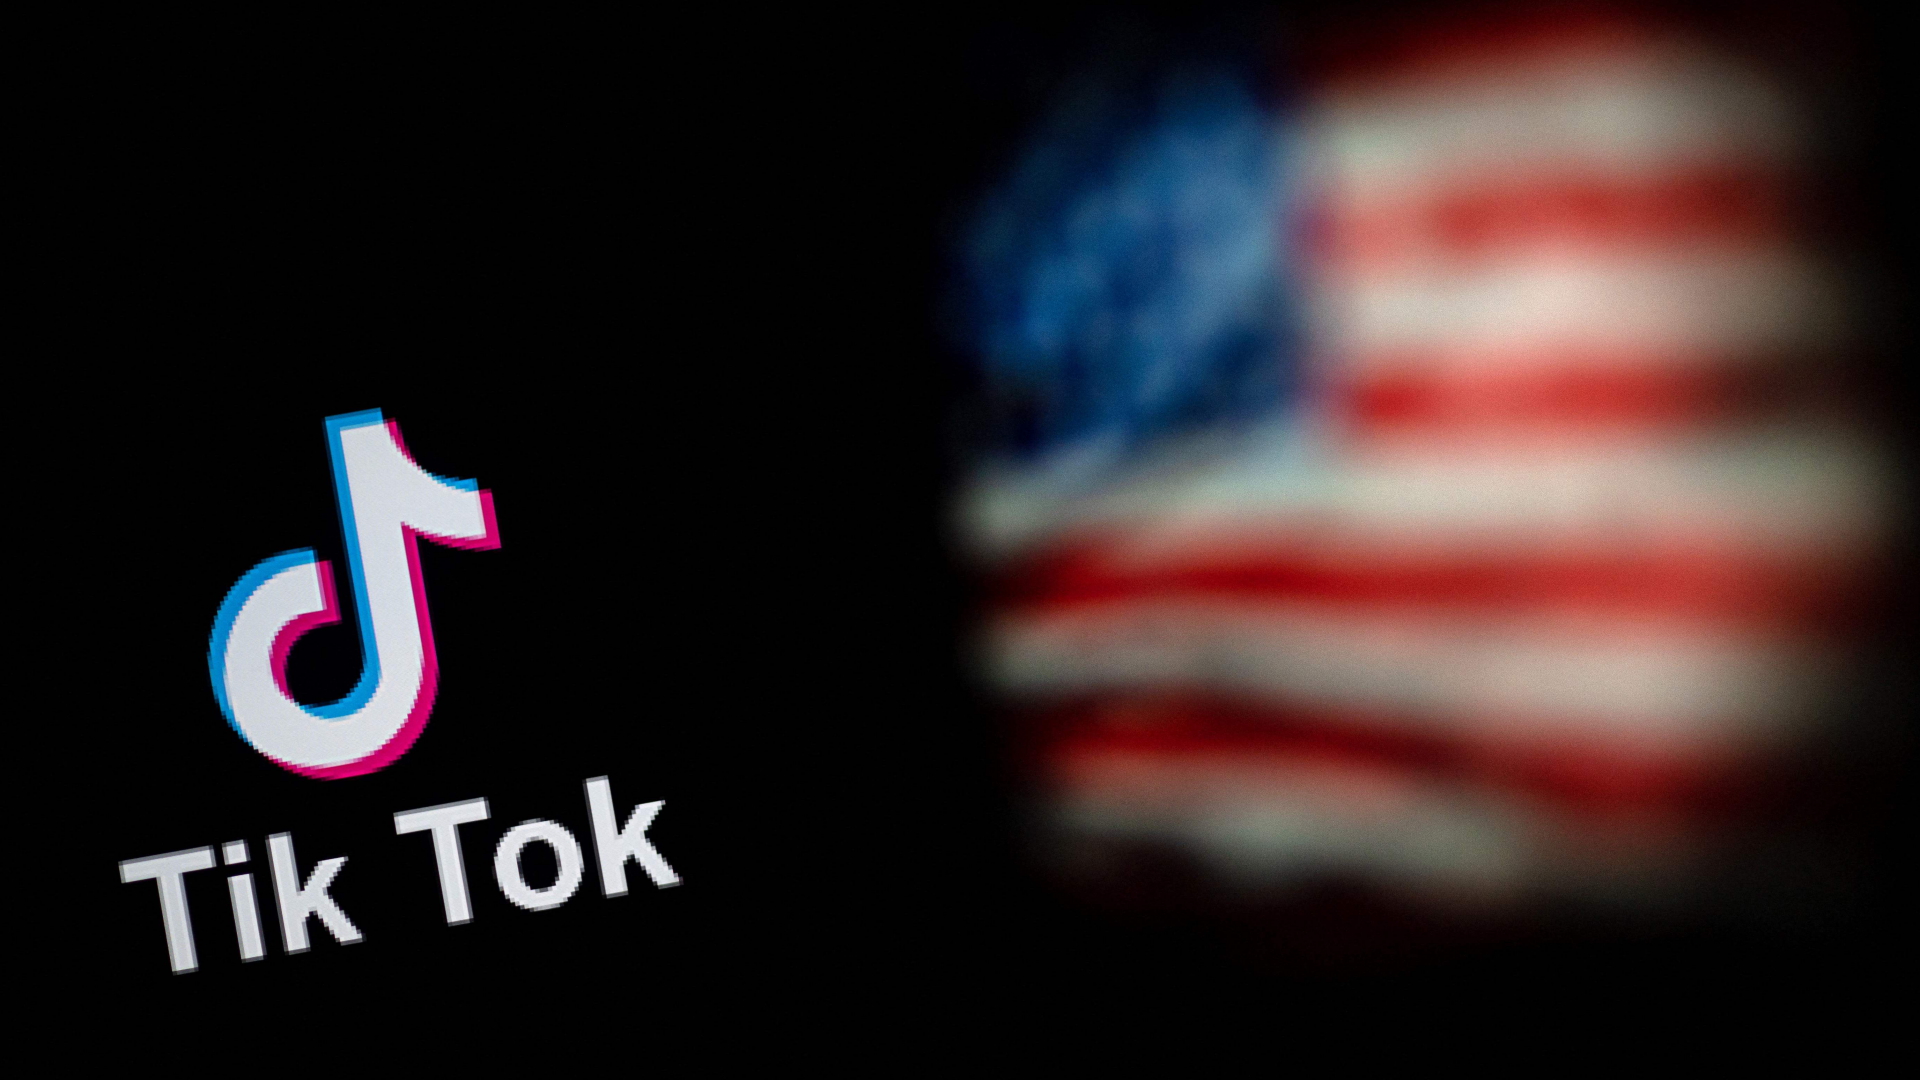 First US State: Montana Wants to Ban TikTok Completely